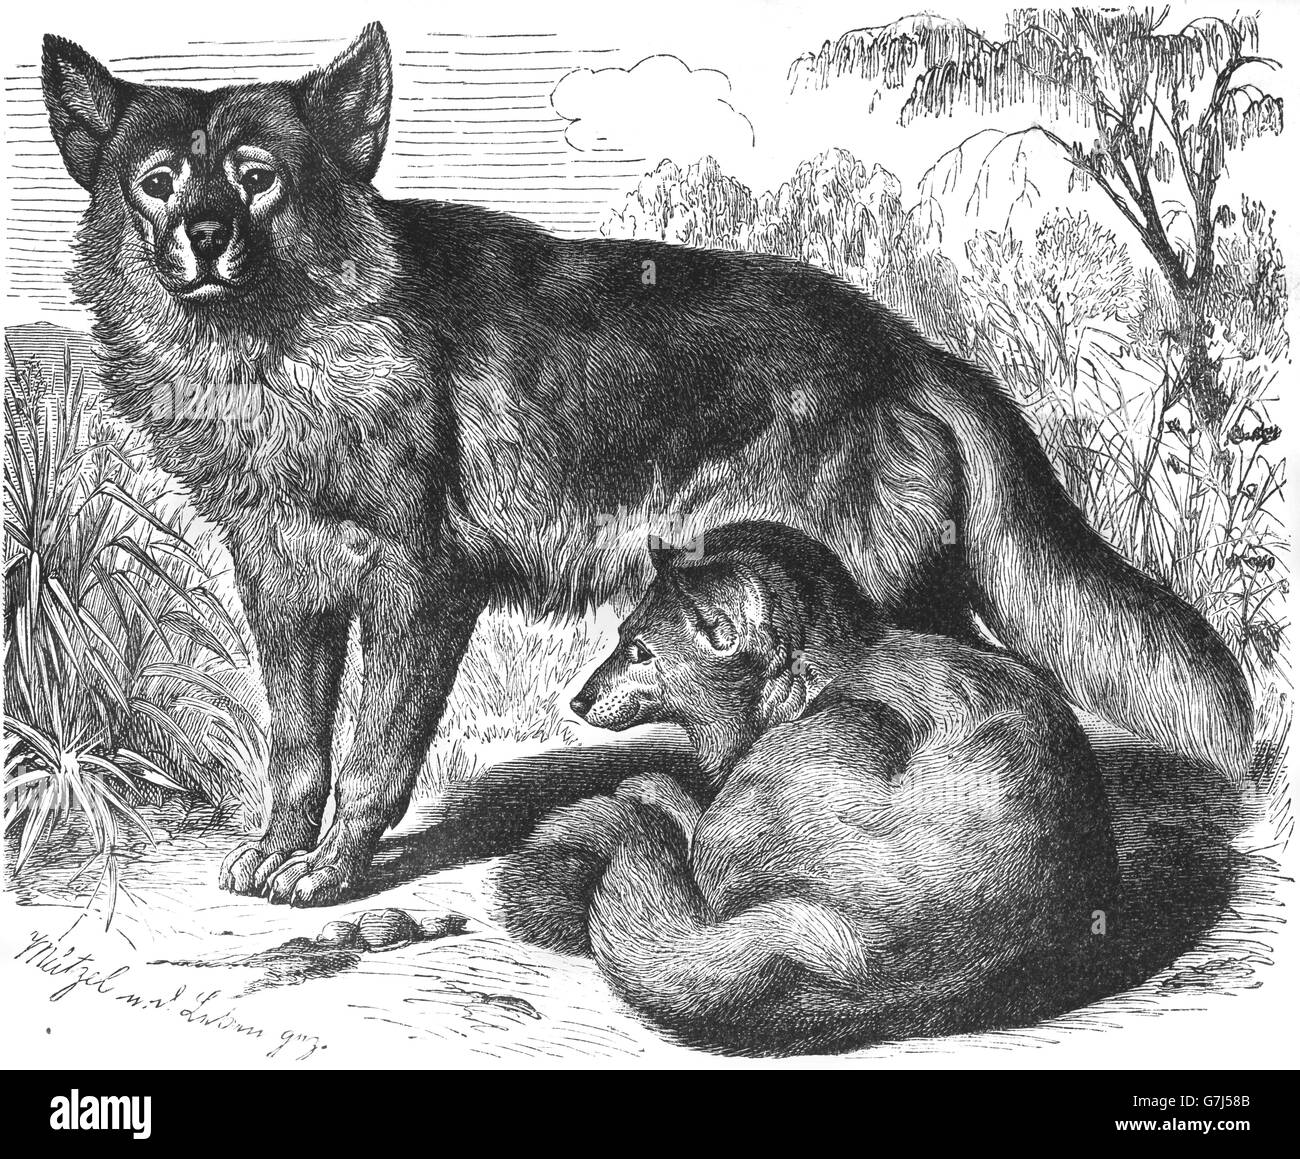 Dingo, Canis lupus dingo, wild dog, illustration from book dated 1904 Stock Photo